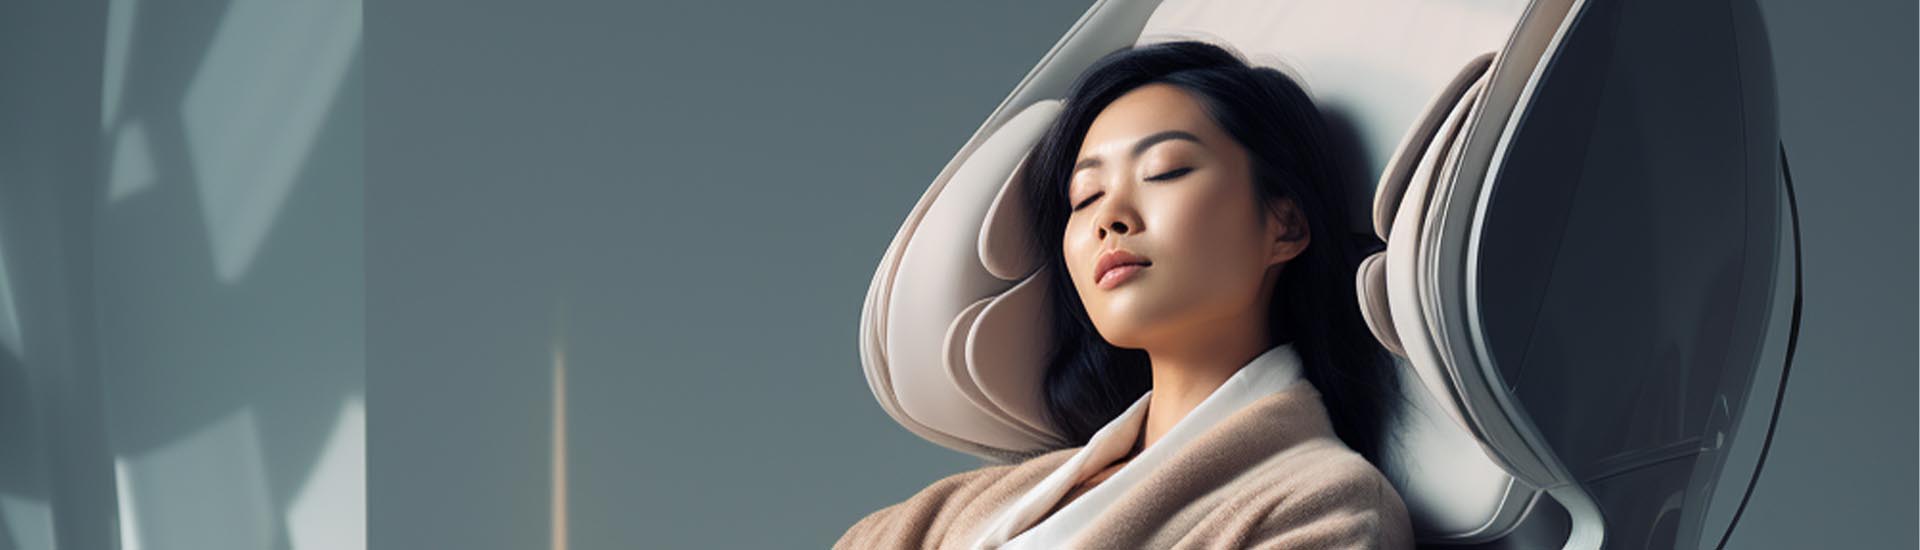 An image of a woman resting on a massage chair